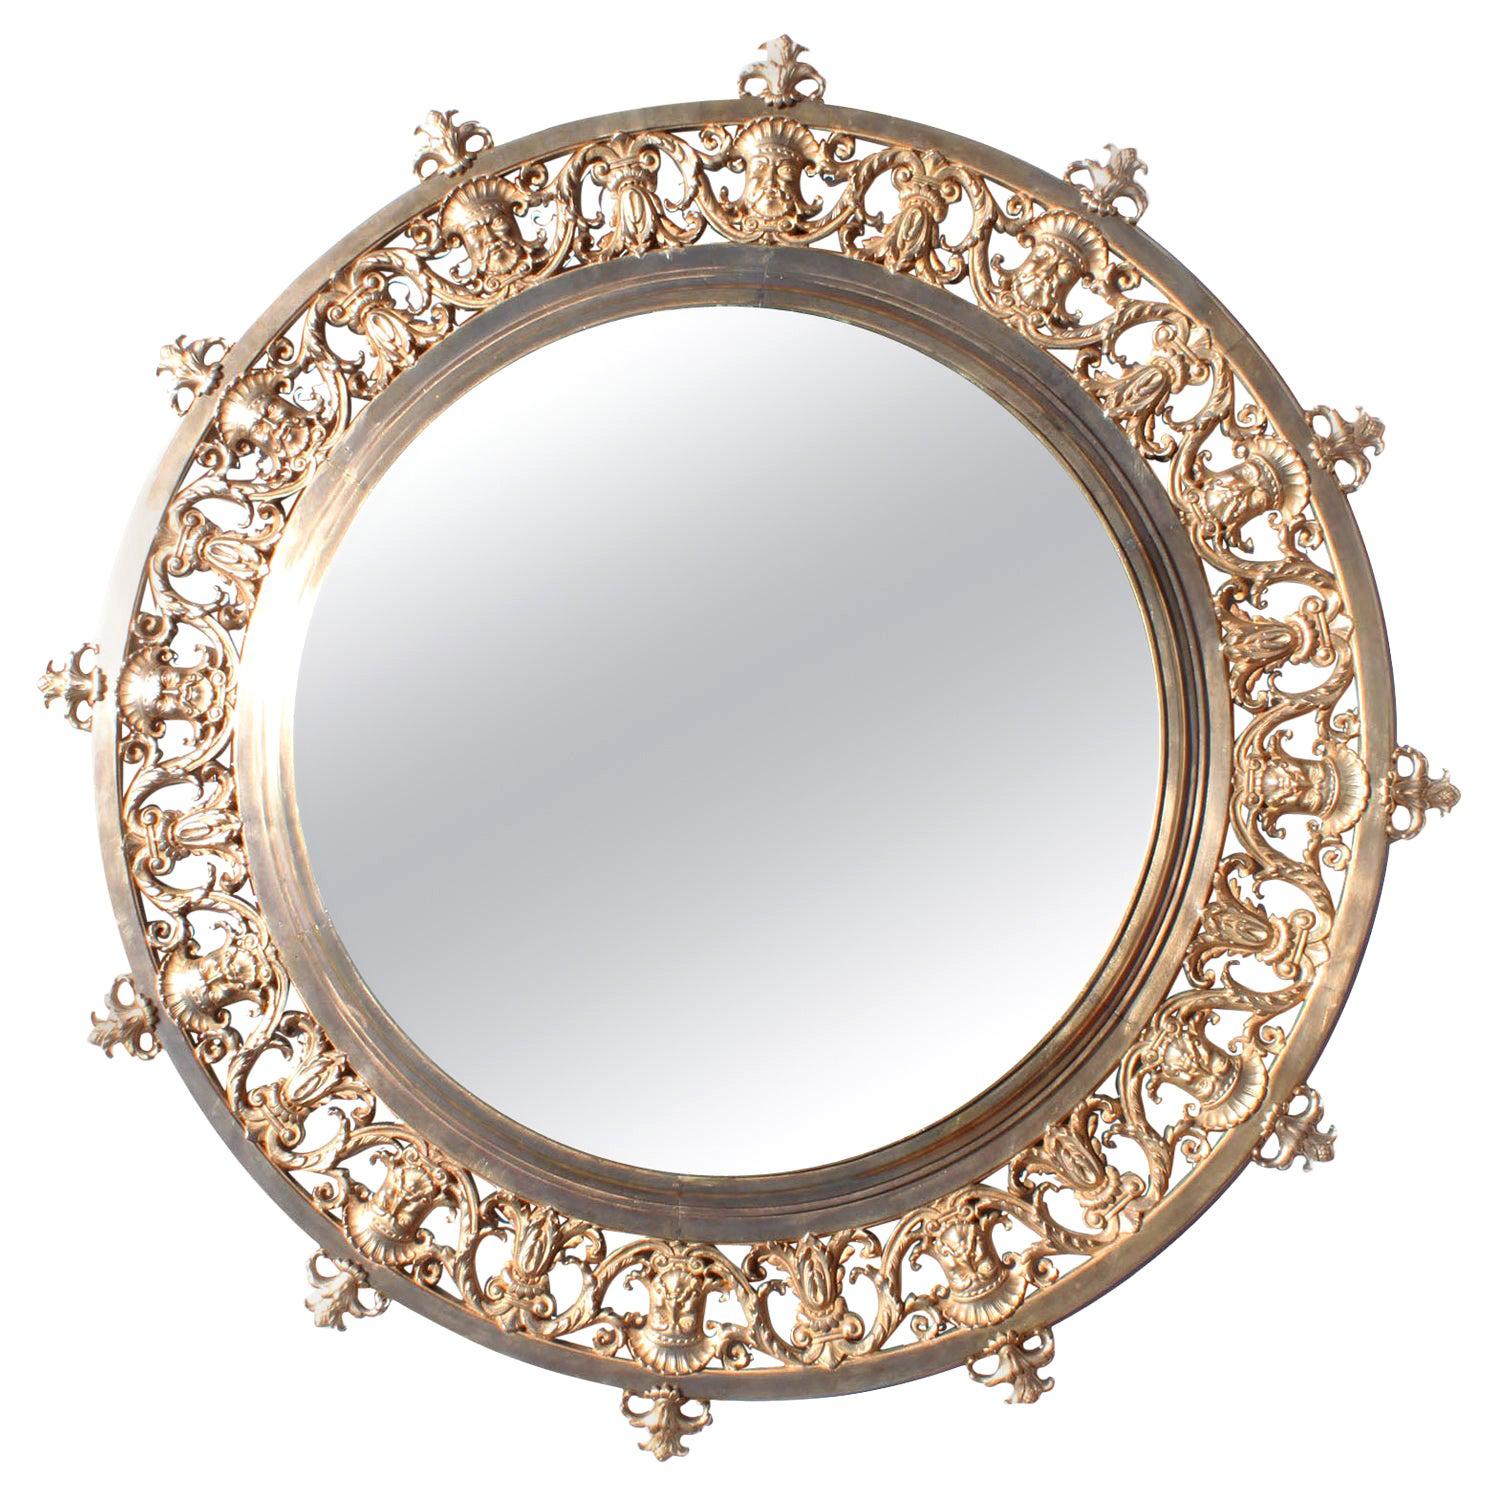 Large 19th Century Baroque Revival Style Gilt-Bronze Round Mirror Frame For Sale